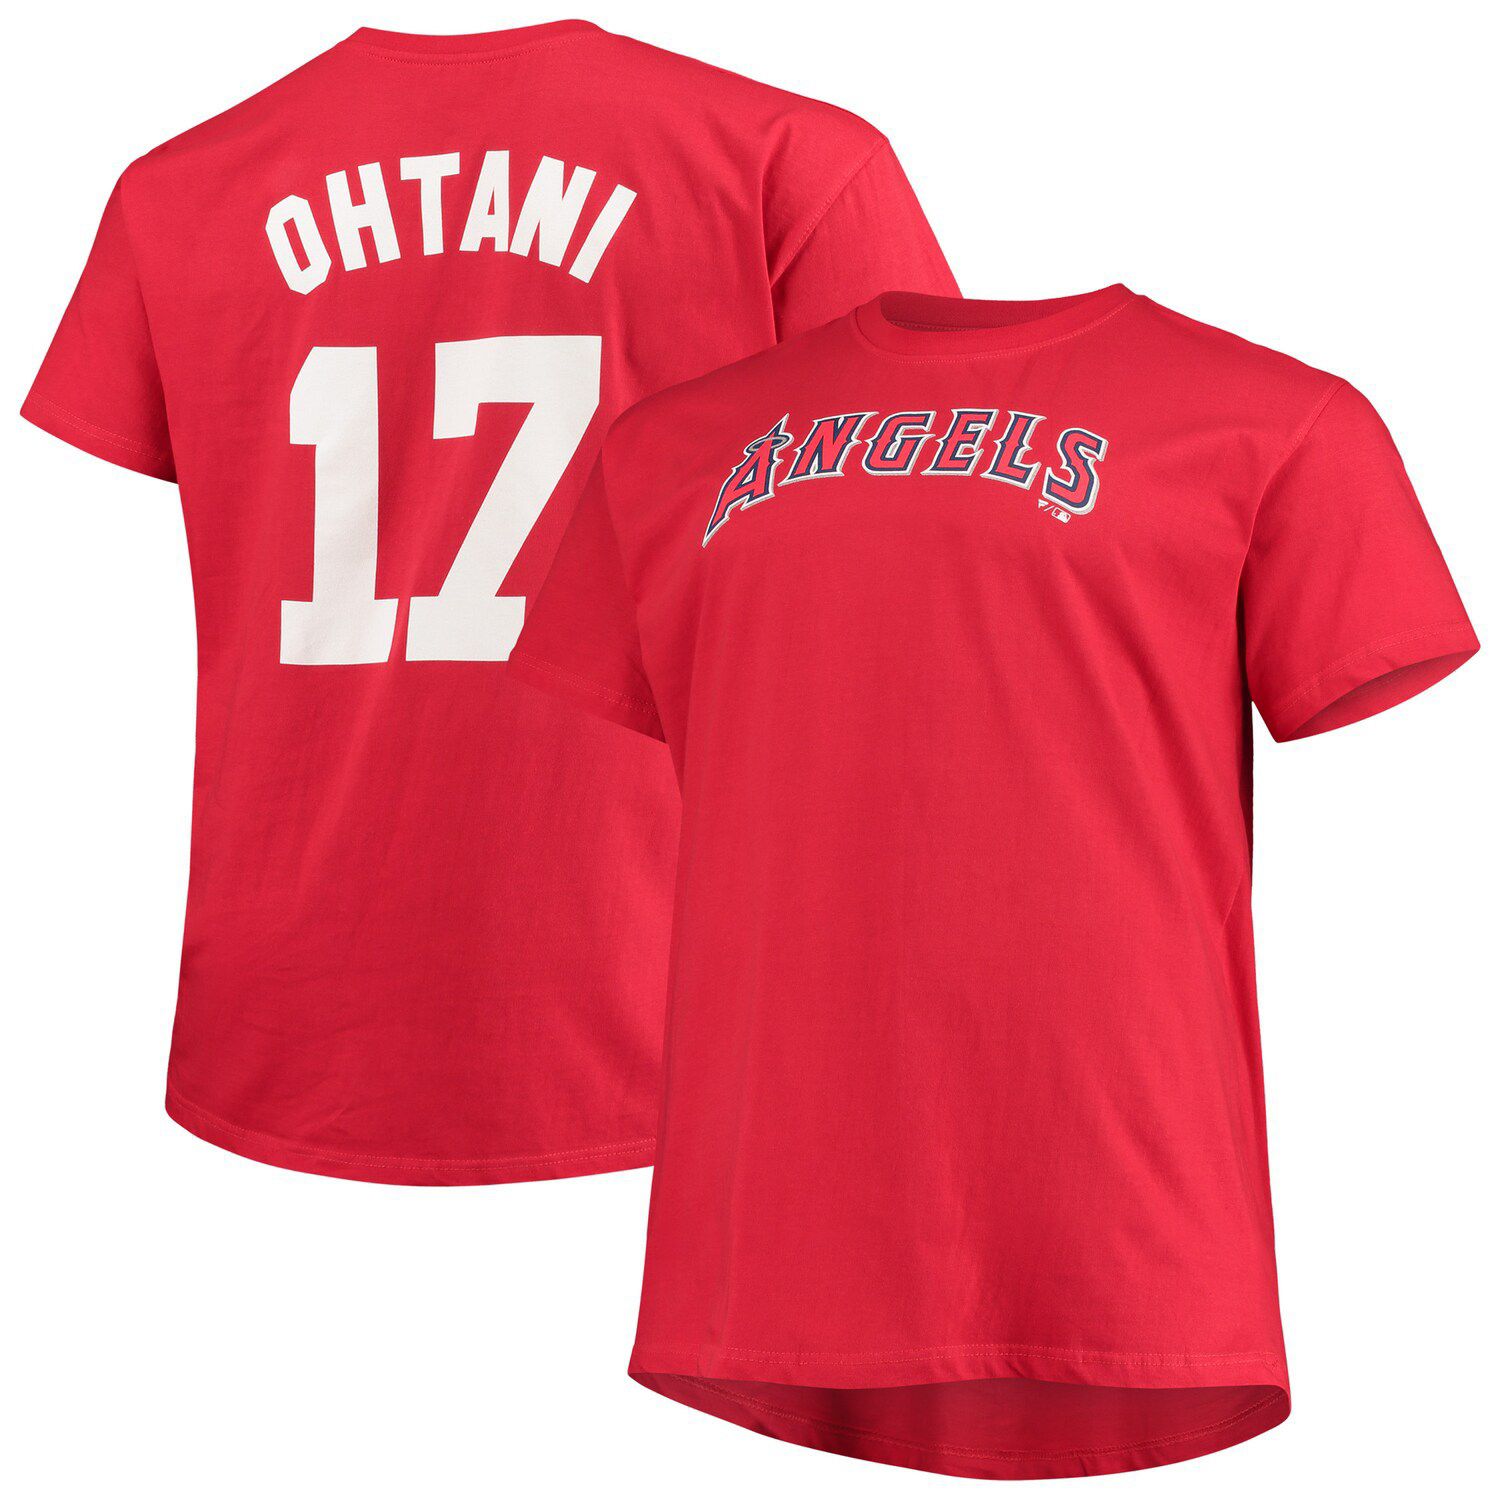 Toddler Nike Shohei Ohtani Cream Los Angeles Angels 2022 City Connect Replica Player Jersey Size: 2T